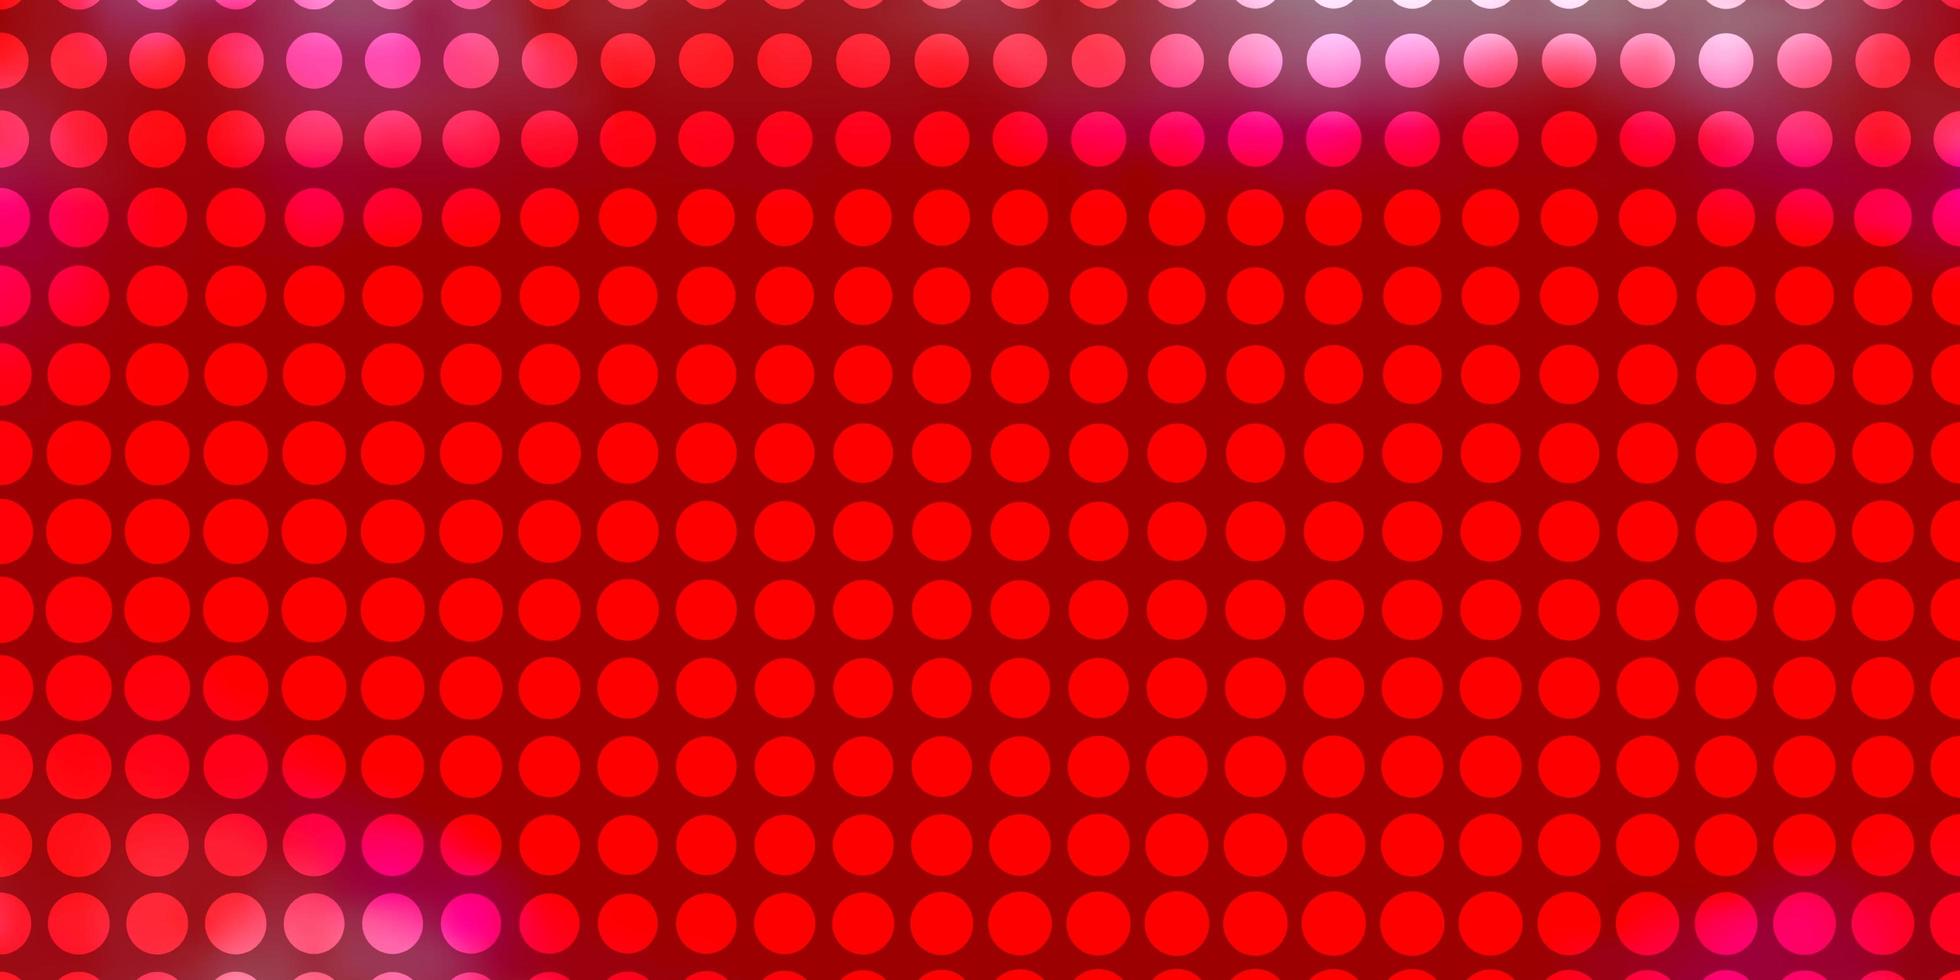 Light Red vector background with circles. Illustration with set of shining colorful abstract spheres. Design for your commercials.